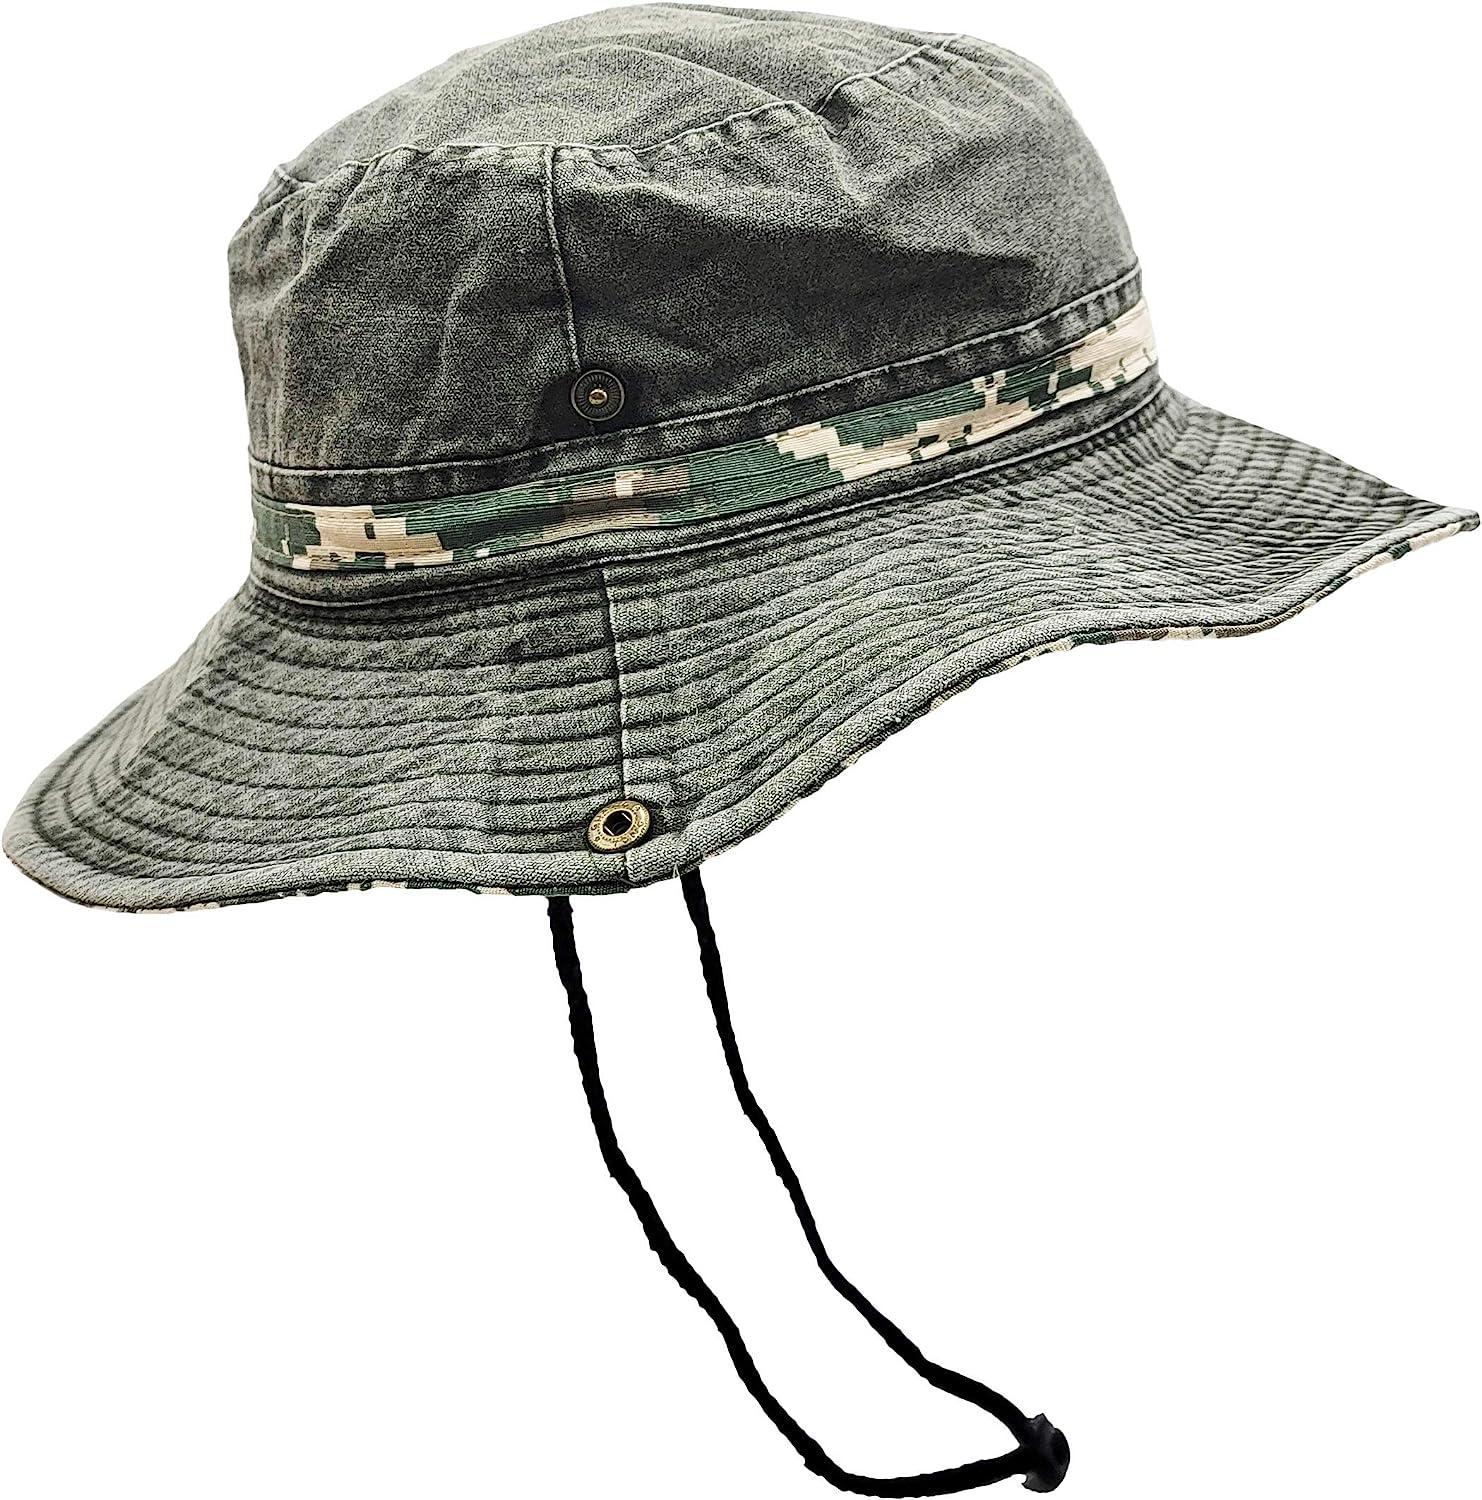 Outdoor Boonie Sun Hat for Hiking, Camping, Fishing, Operator